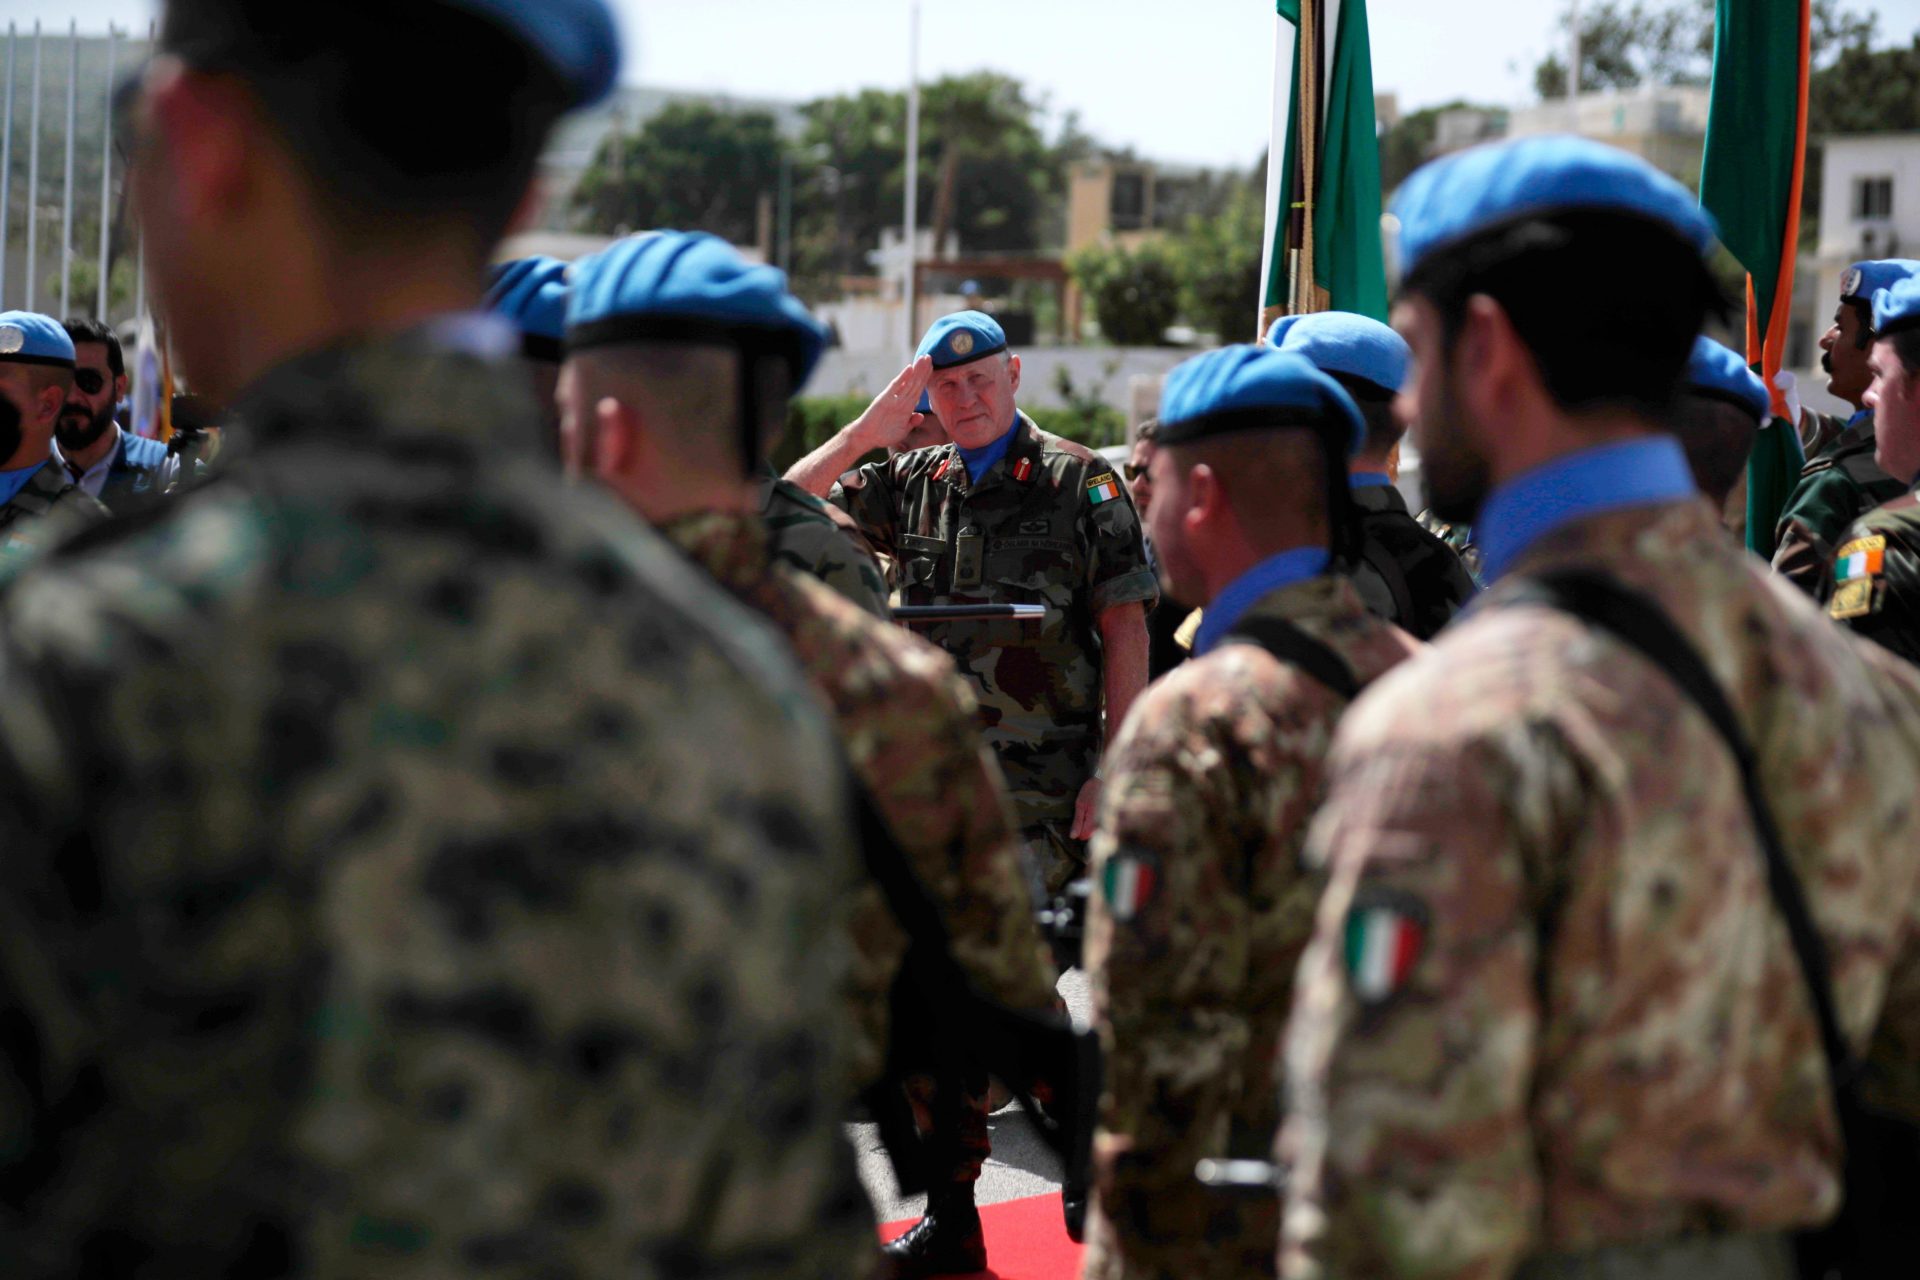 2MNMWA4 Head of Mission and Force Commander of the United Nations Interim Force in Lebanon (UNIFIL), Maj. Gen. Michael Beary of Ireland, center, reviews an honor guard of United Nations peacekeepers, on his arrival at their headquarters, during a ceremony to mark the 40th anniversary of UNIFIL's peacekeeping presence in southern Lebanon, in the coastal town of Naqoura, Lebanon, Monday, March 19, 2018. (AP Photo/Hassan Ammar)